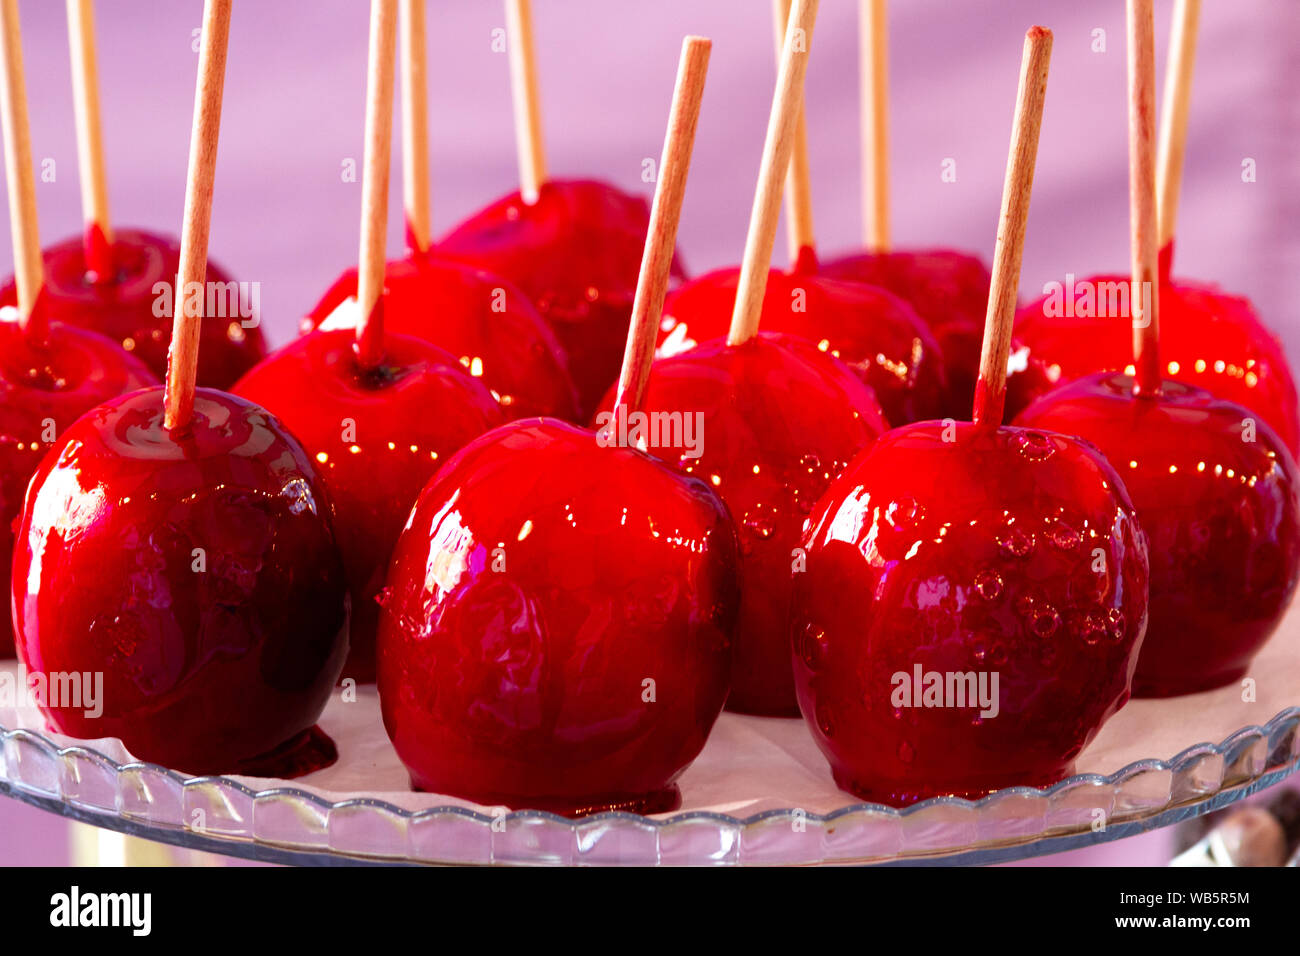 Sweets resembling cherries or other candied fruit Stock Photo